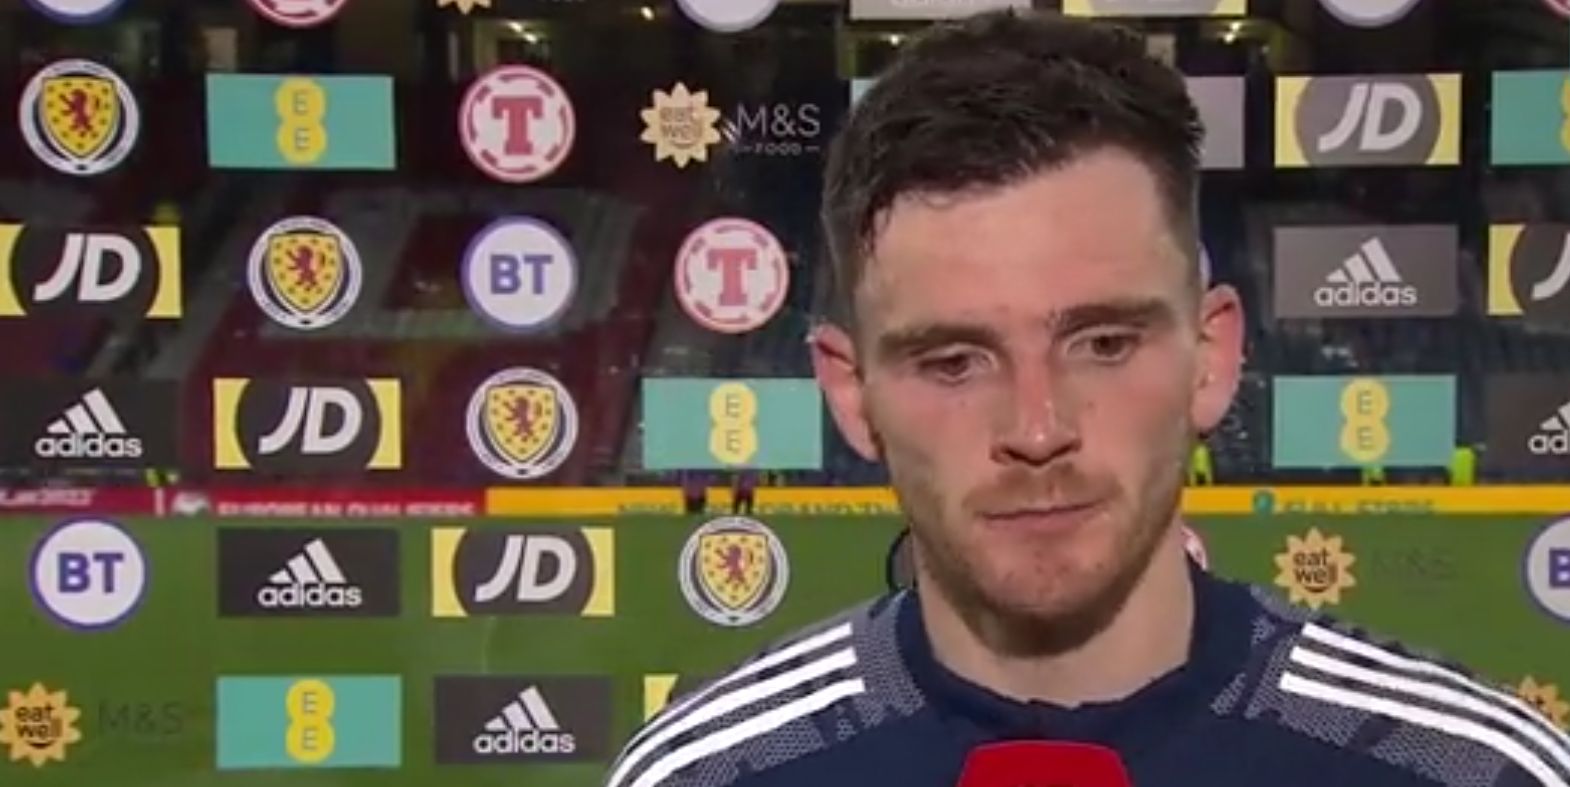 (Video) “We’ve let ourselves down” – Andy Robertson on a “hugely disappointing” evening for Scotland against Ukraine